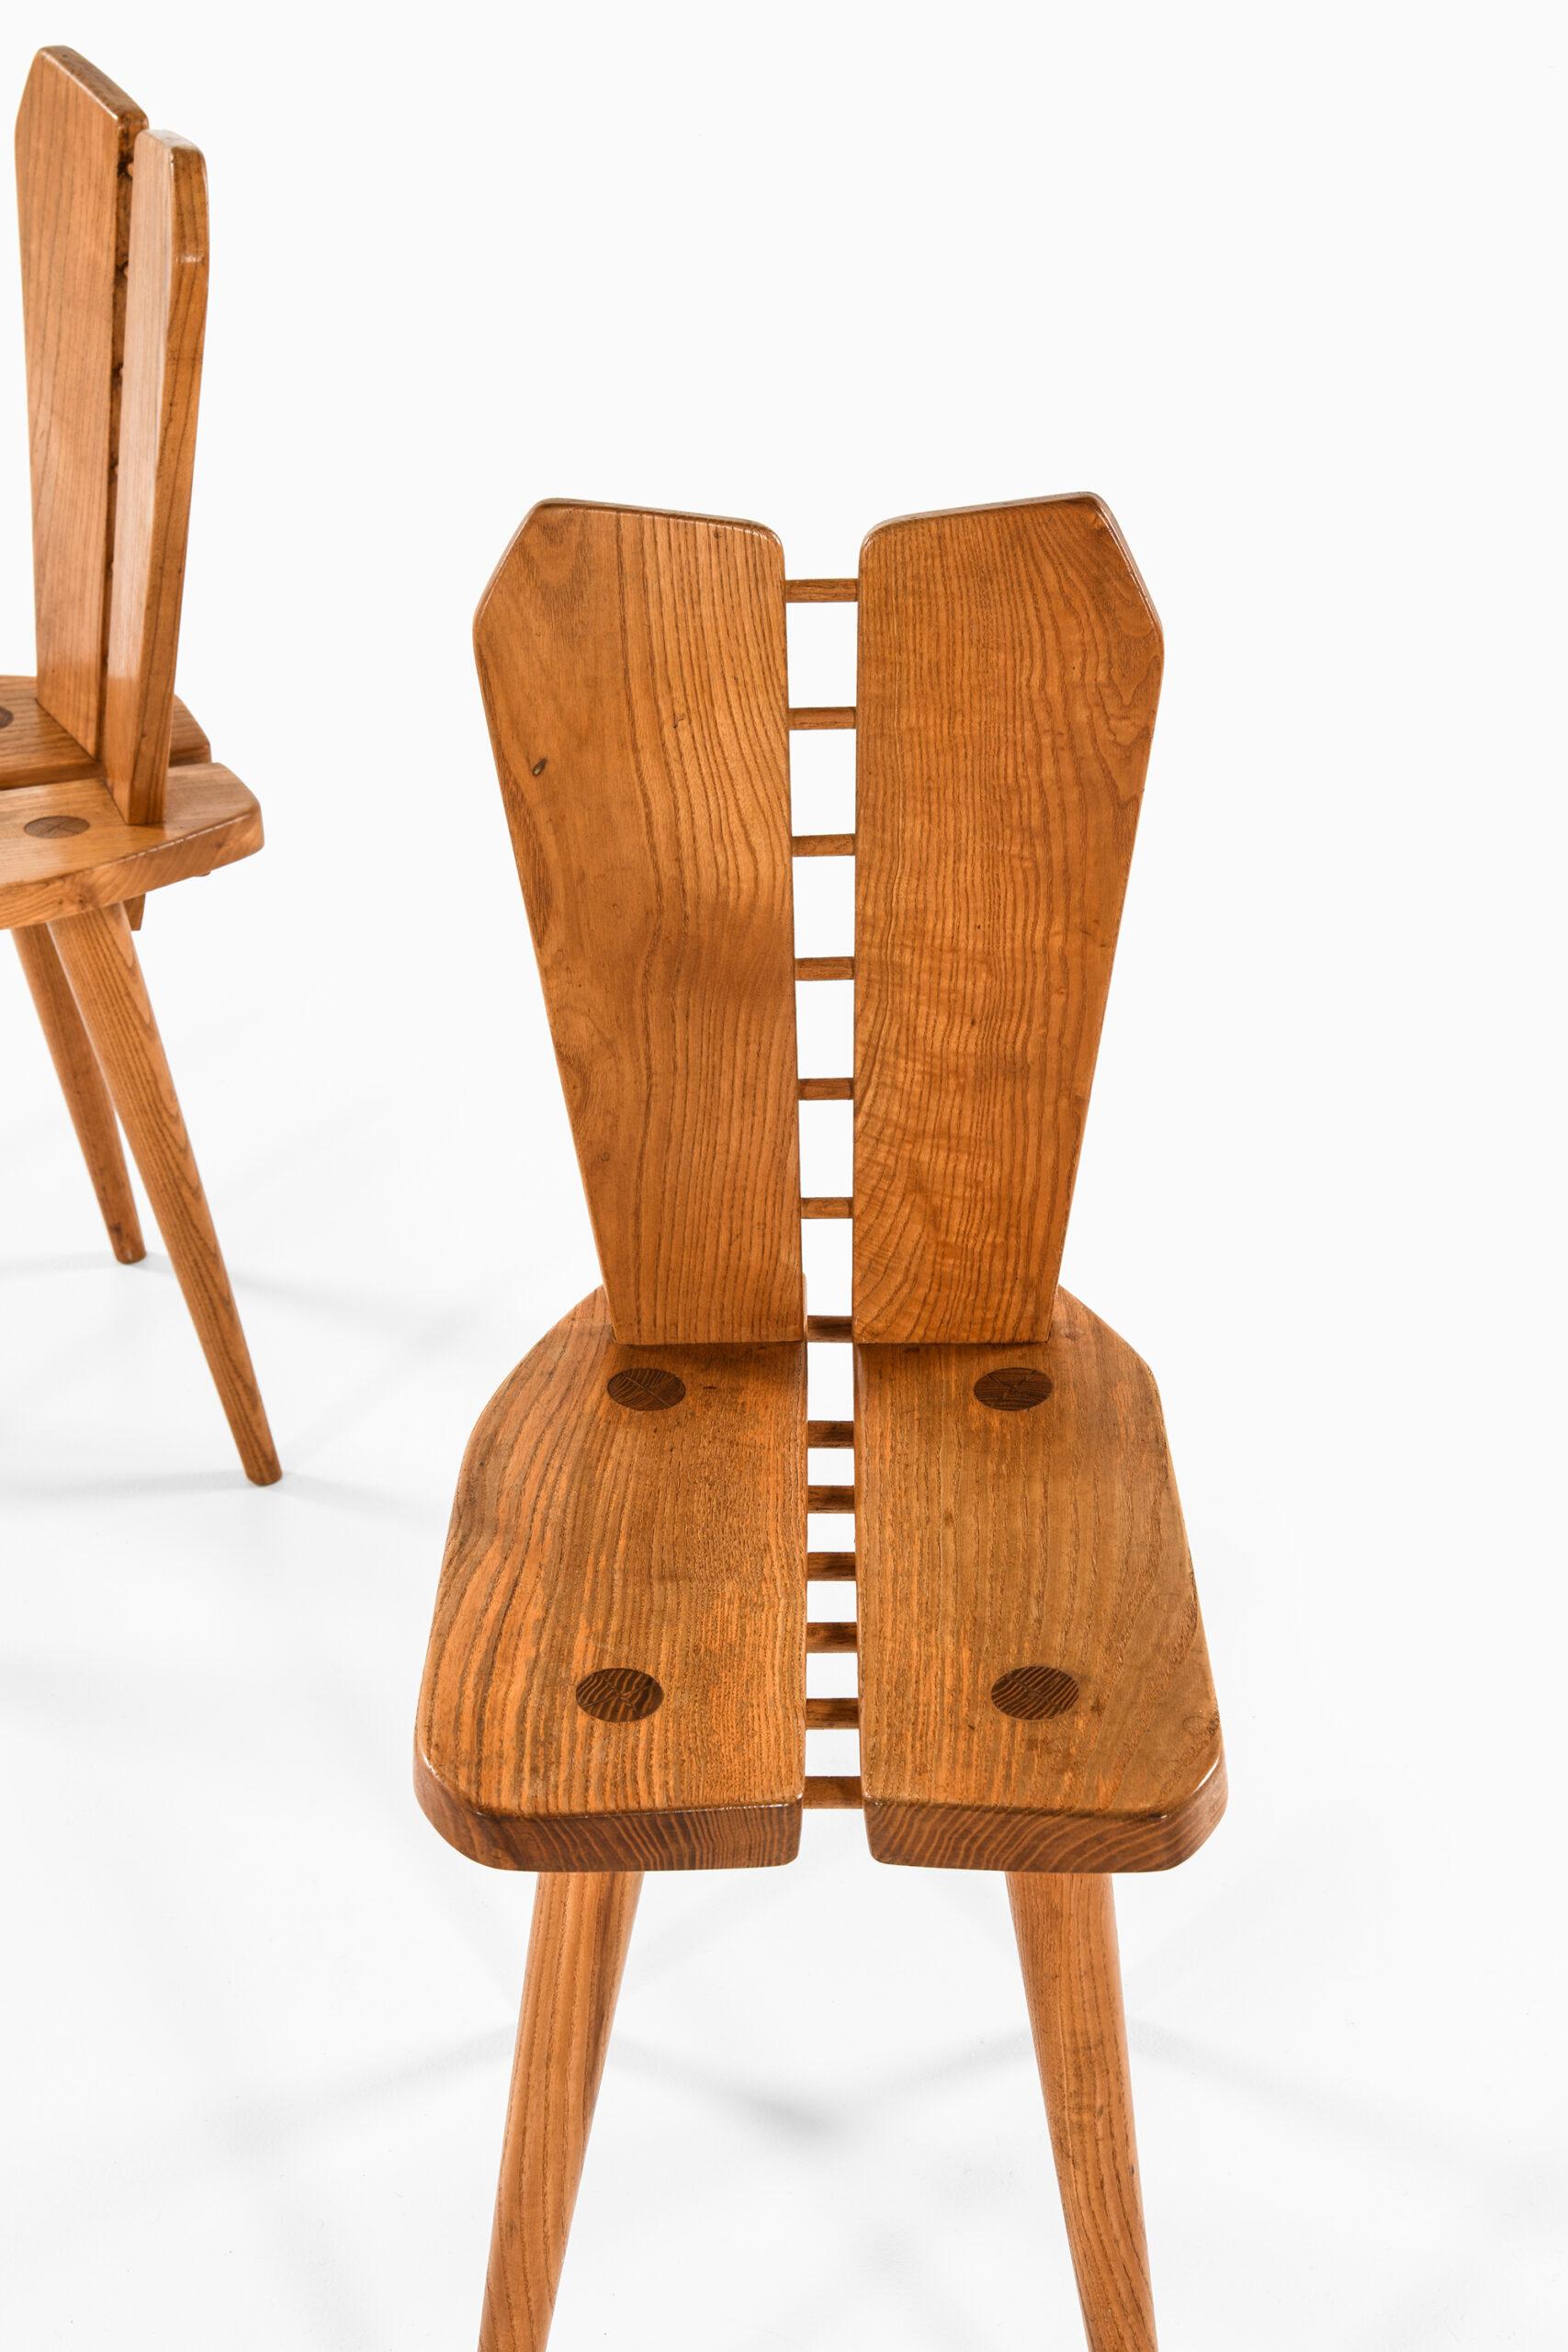 Rare pair of chairs by unknown designer. Produced in Scandinavia.